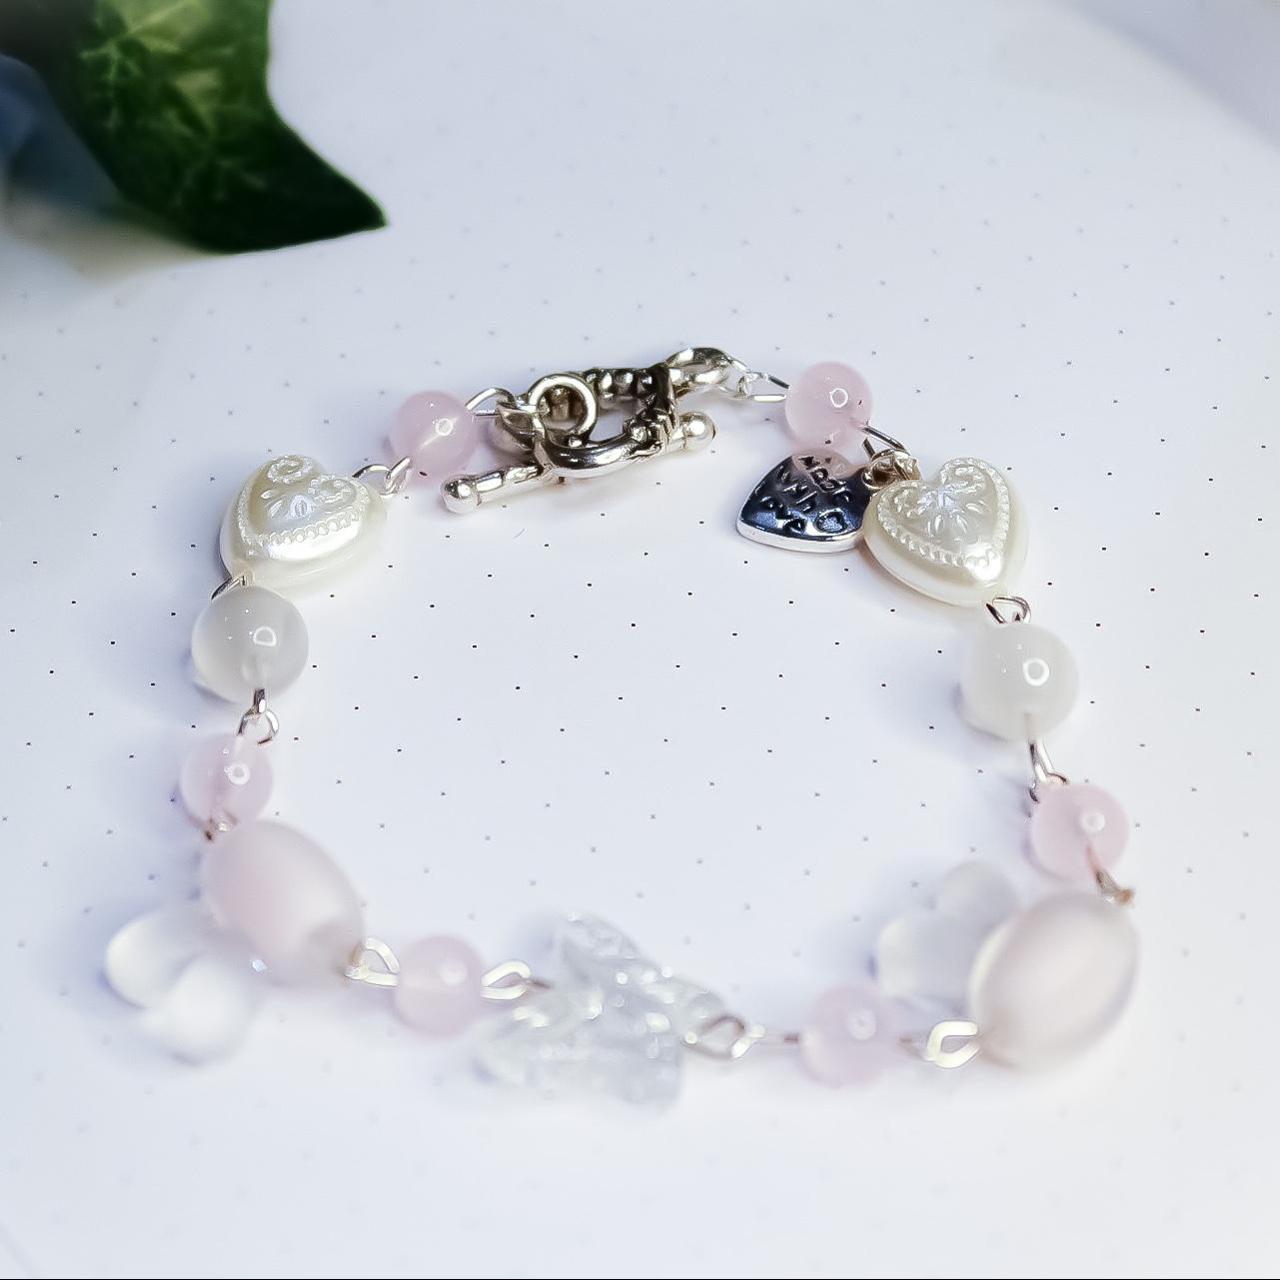 𝒷𝓊𝓃𝓃𝓎 𝒽𝑜𝓃𝑒𝓎 𝓅𝒾𝓃𝓀 𝓋𝑒𝓇 𝒷𝓇𝒶𝒸𝑒𝓁𝑒𝓉 ♡ made with pink glass... - Depop